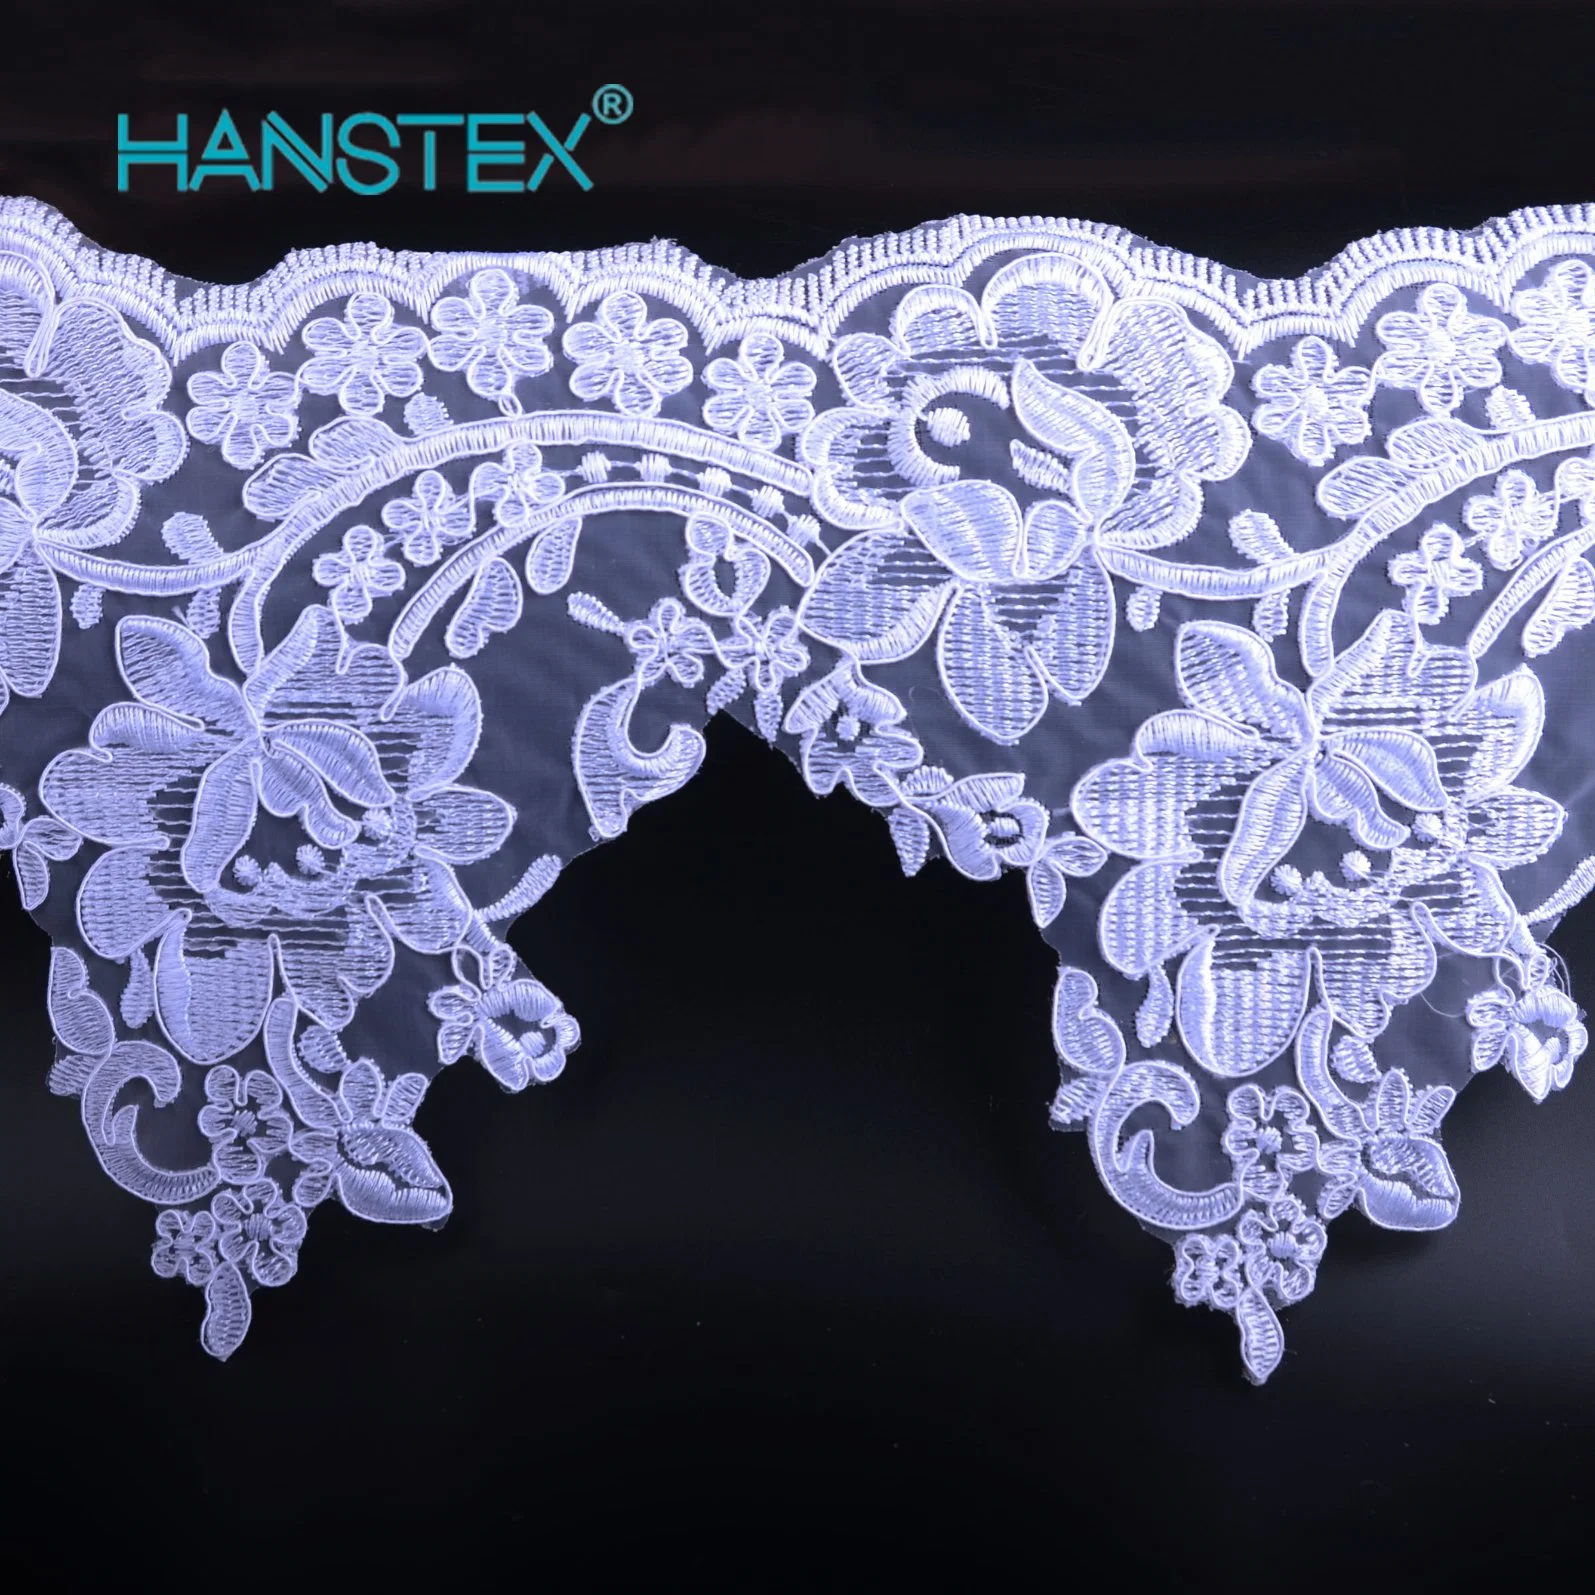 Hans Fast Delivery Professional Design White Embroidery Lace Fabric